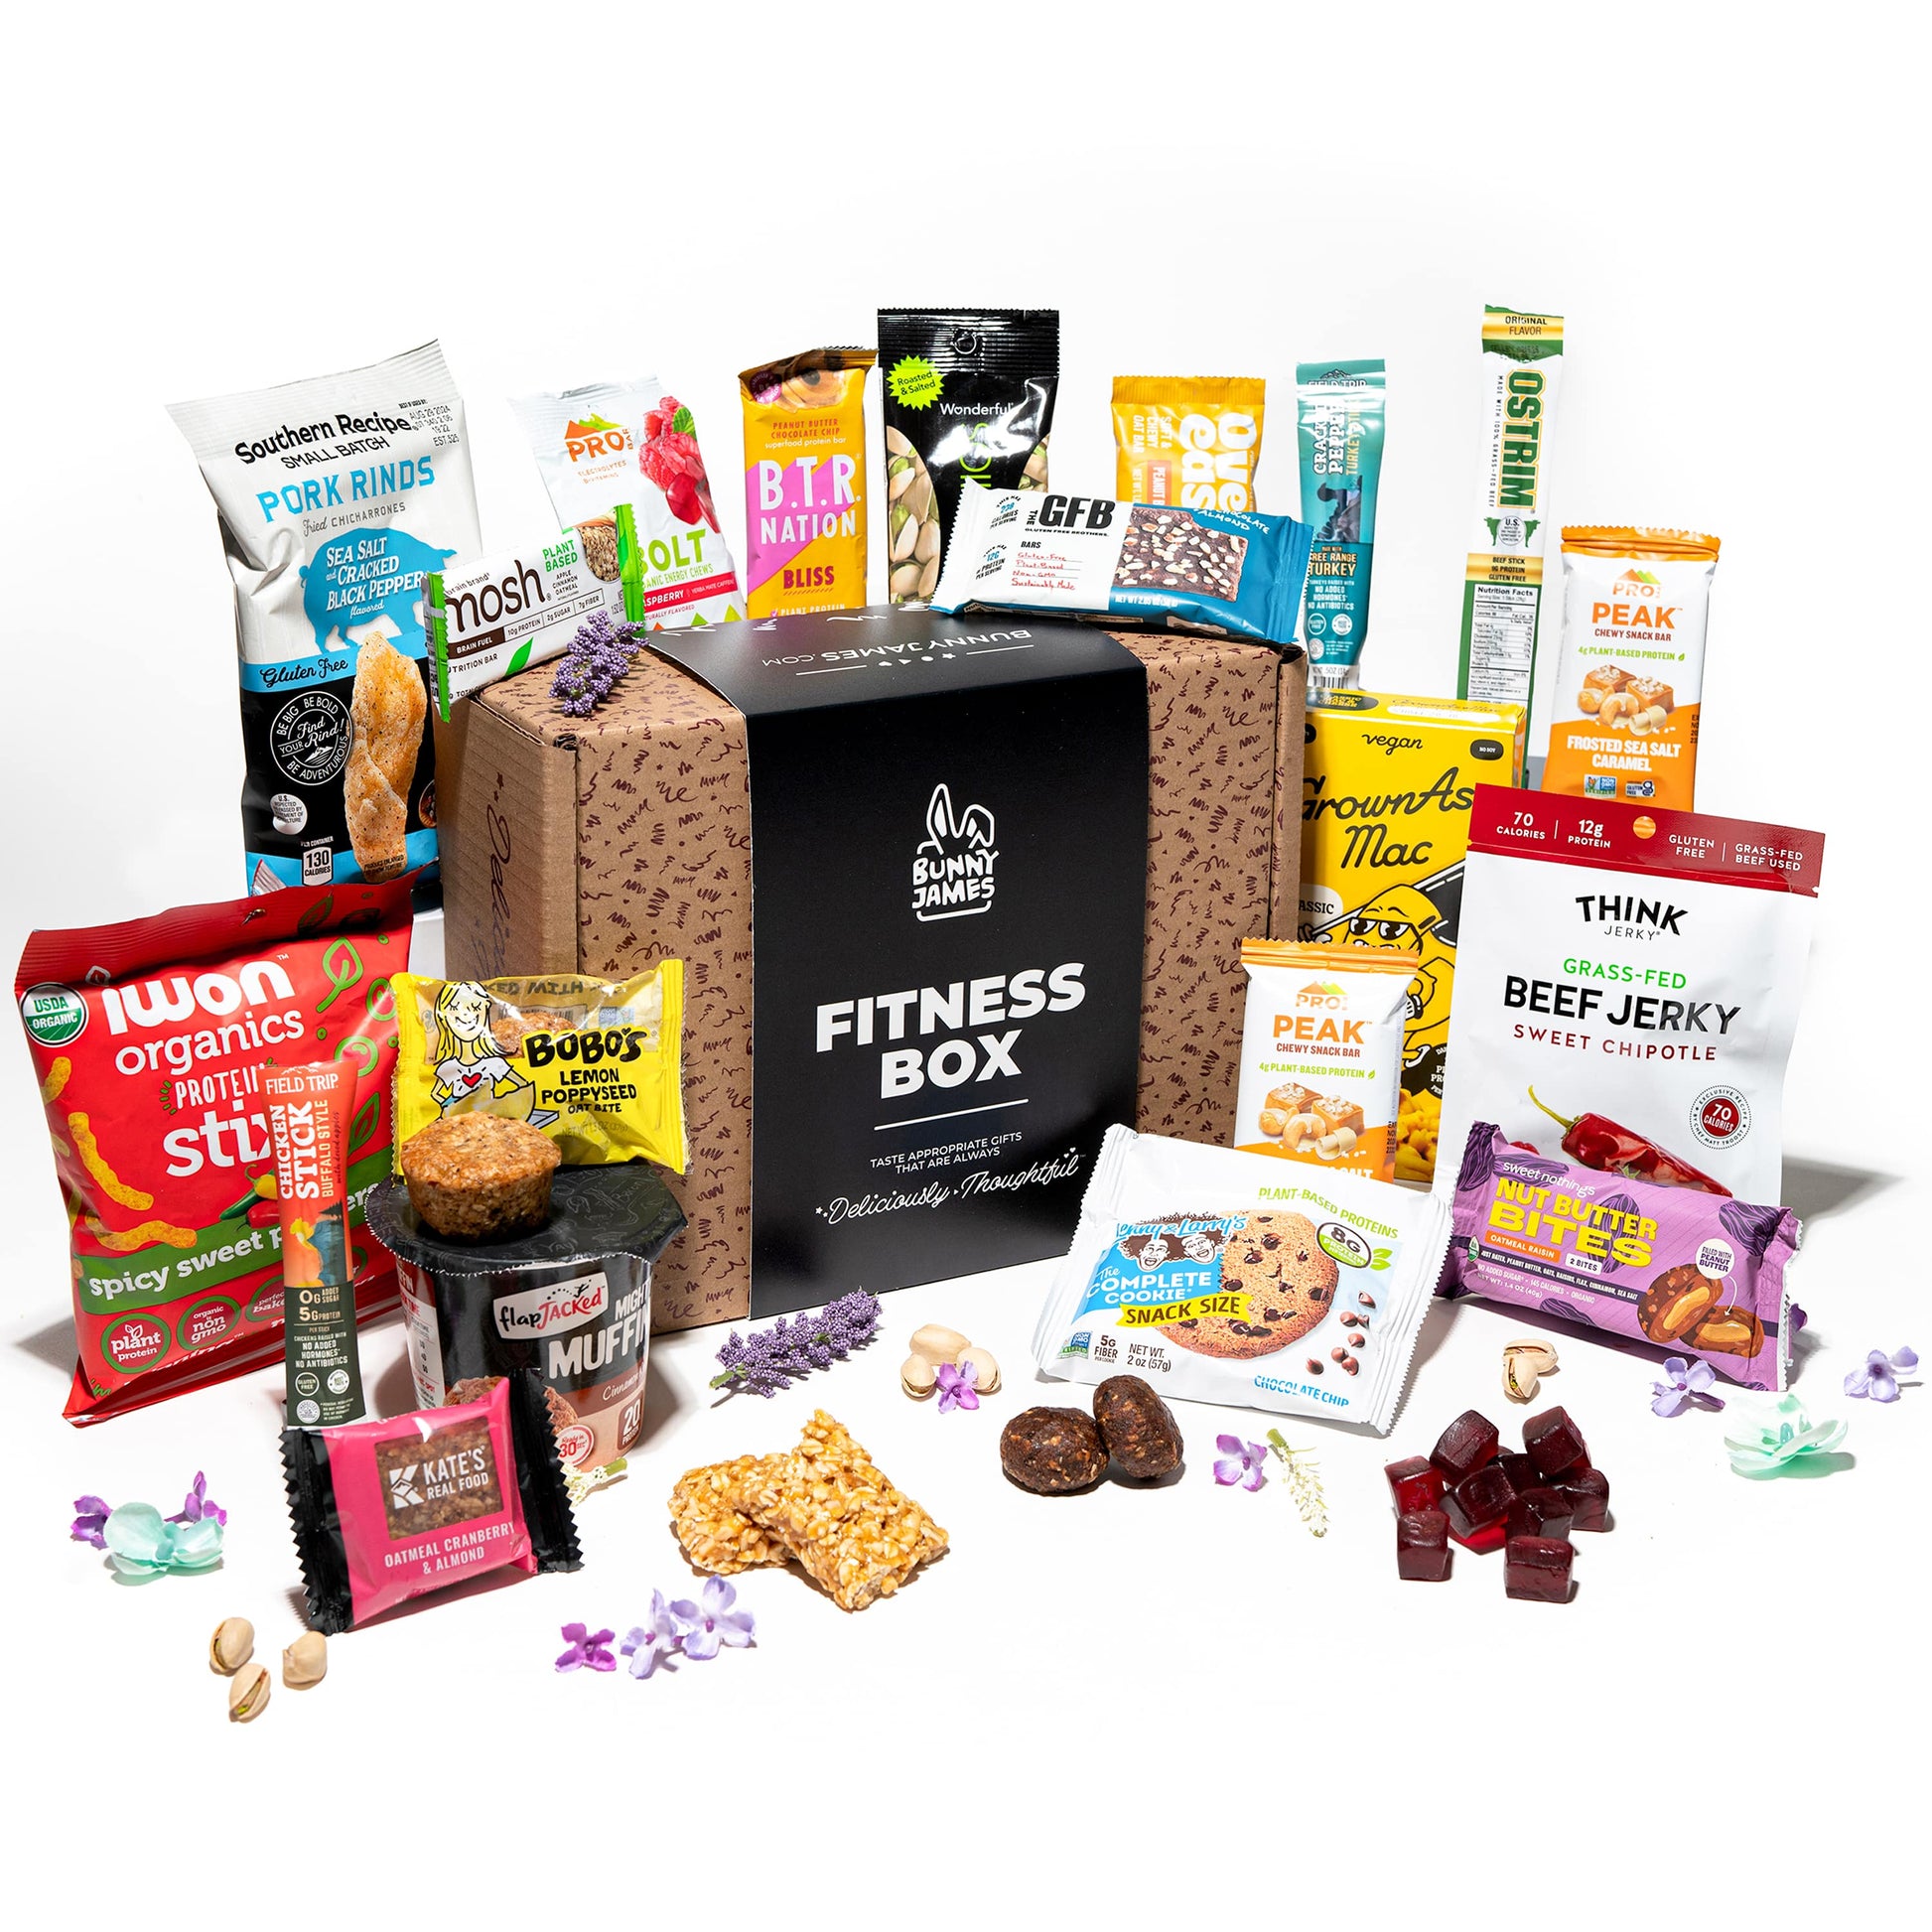 Bunny James Boxes Snack Boxes Pamper Mom: High-Protein Snack Box for Mother's Day